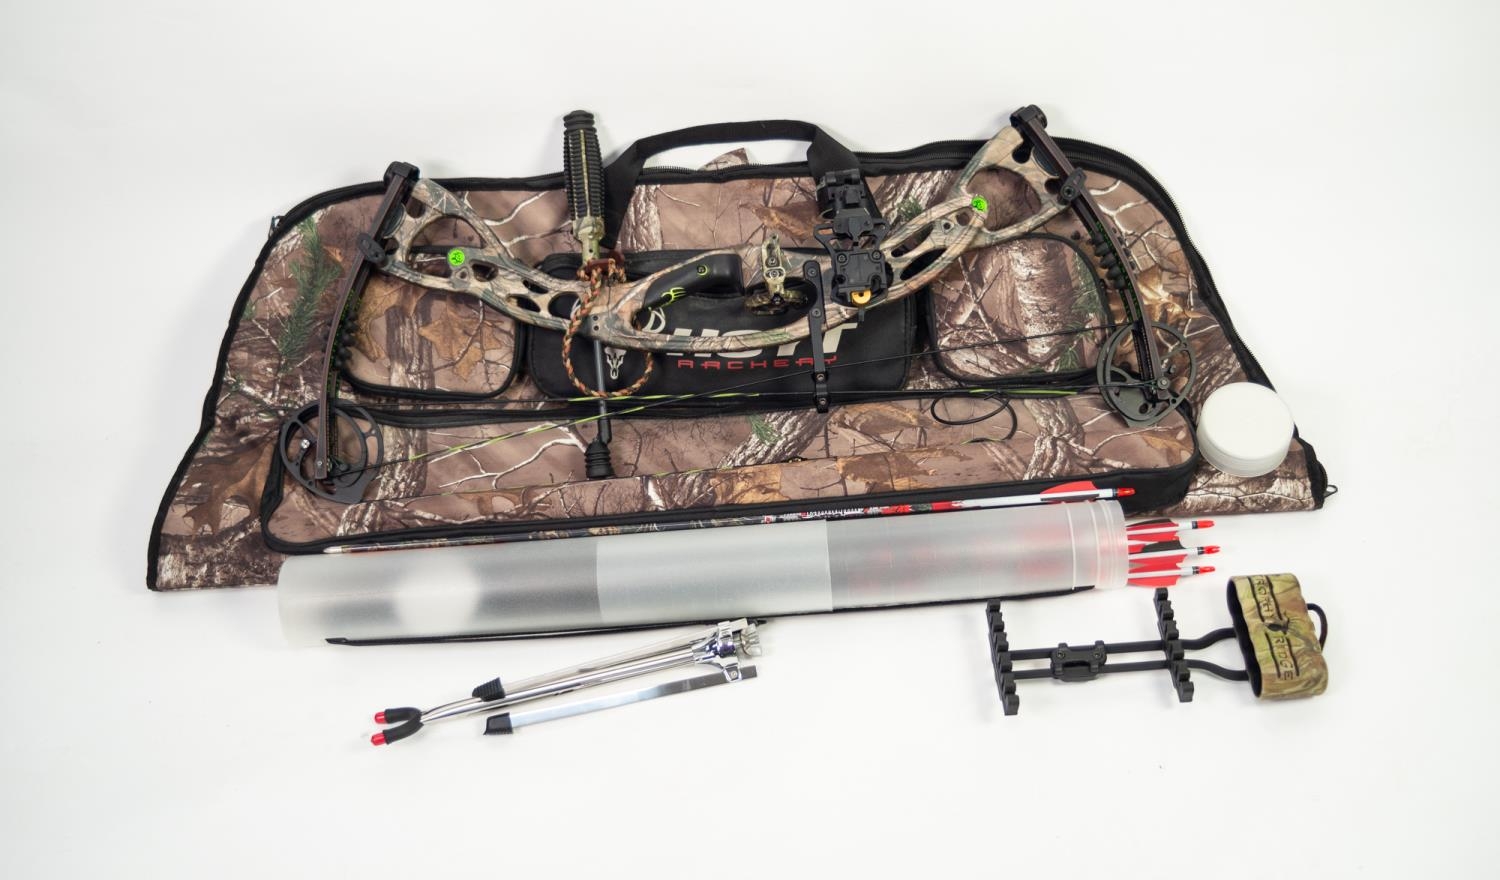 LEFT HANDED HOYT BONE COLLECTOR COLLECTOR?S EDITION COMPOUND BOW, IN CAMO, together with INSTRUCTION